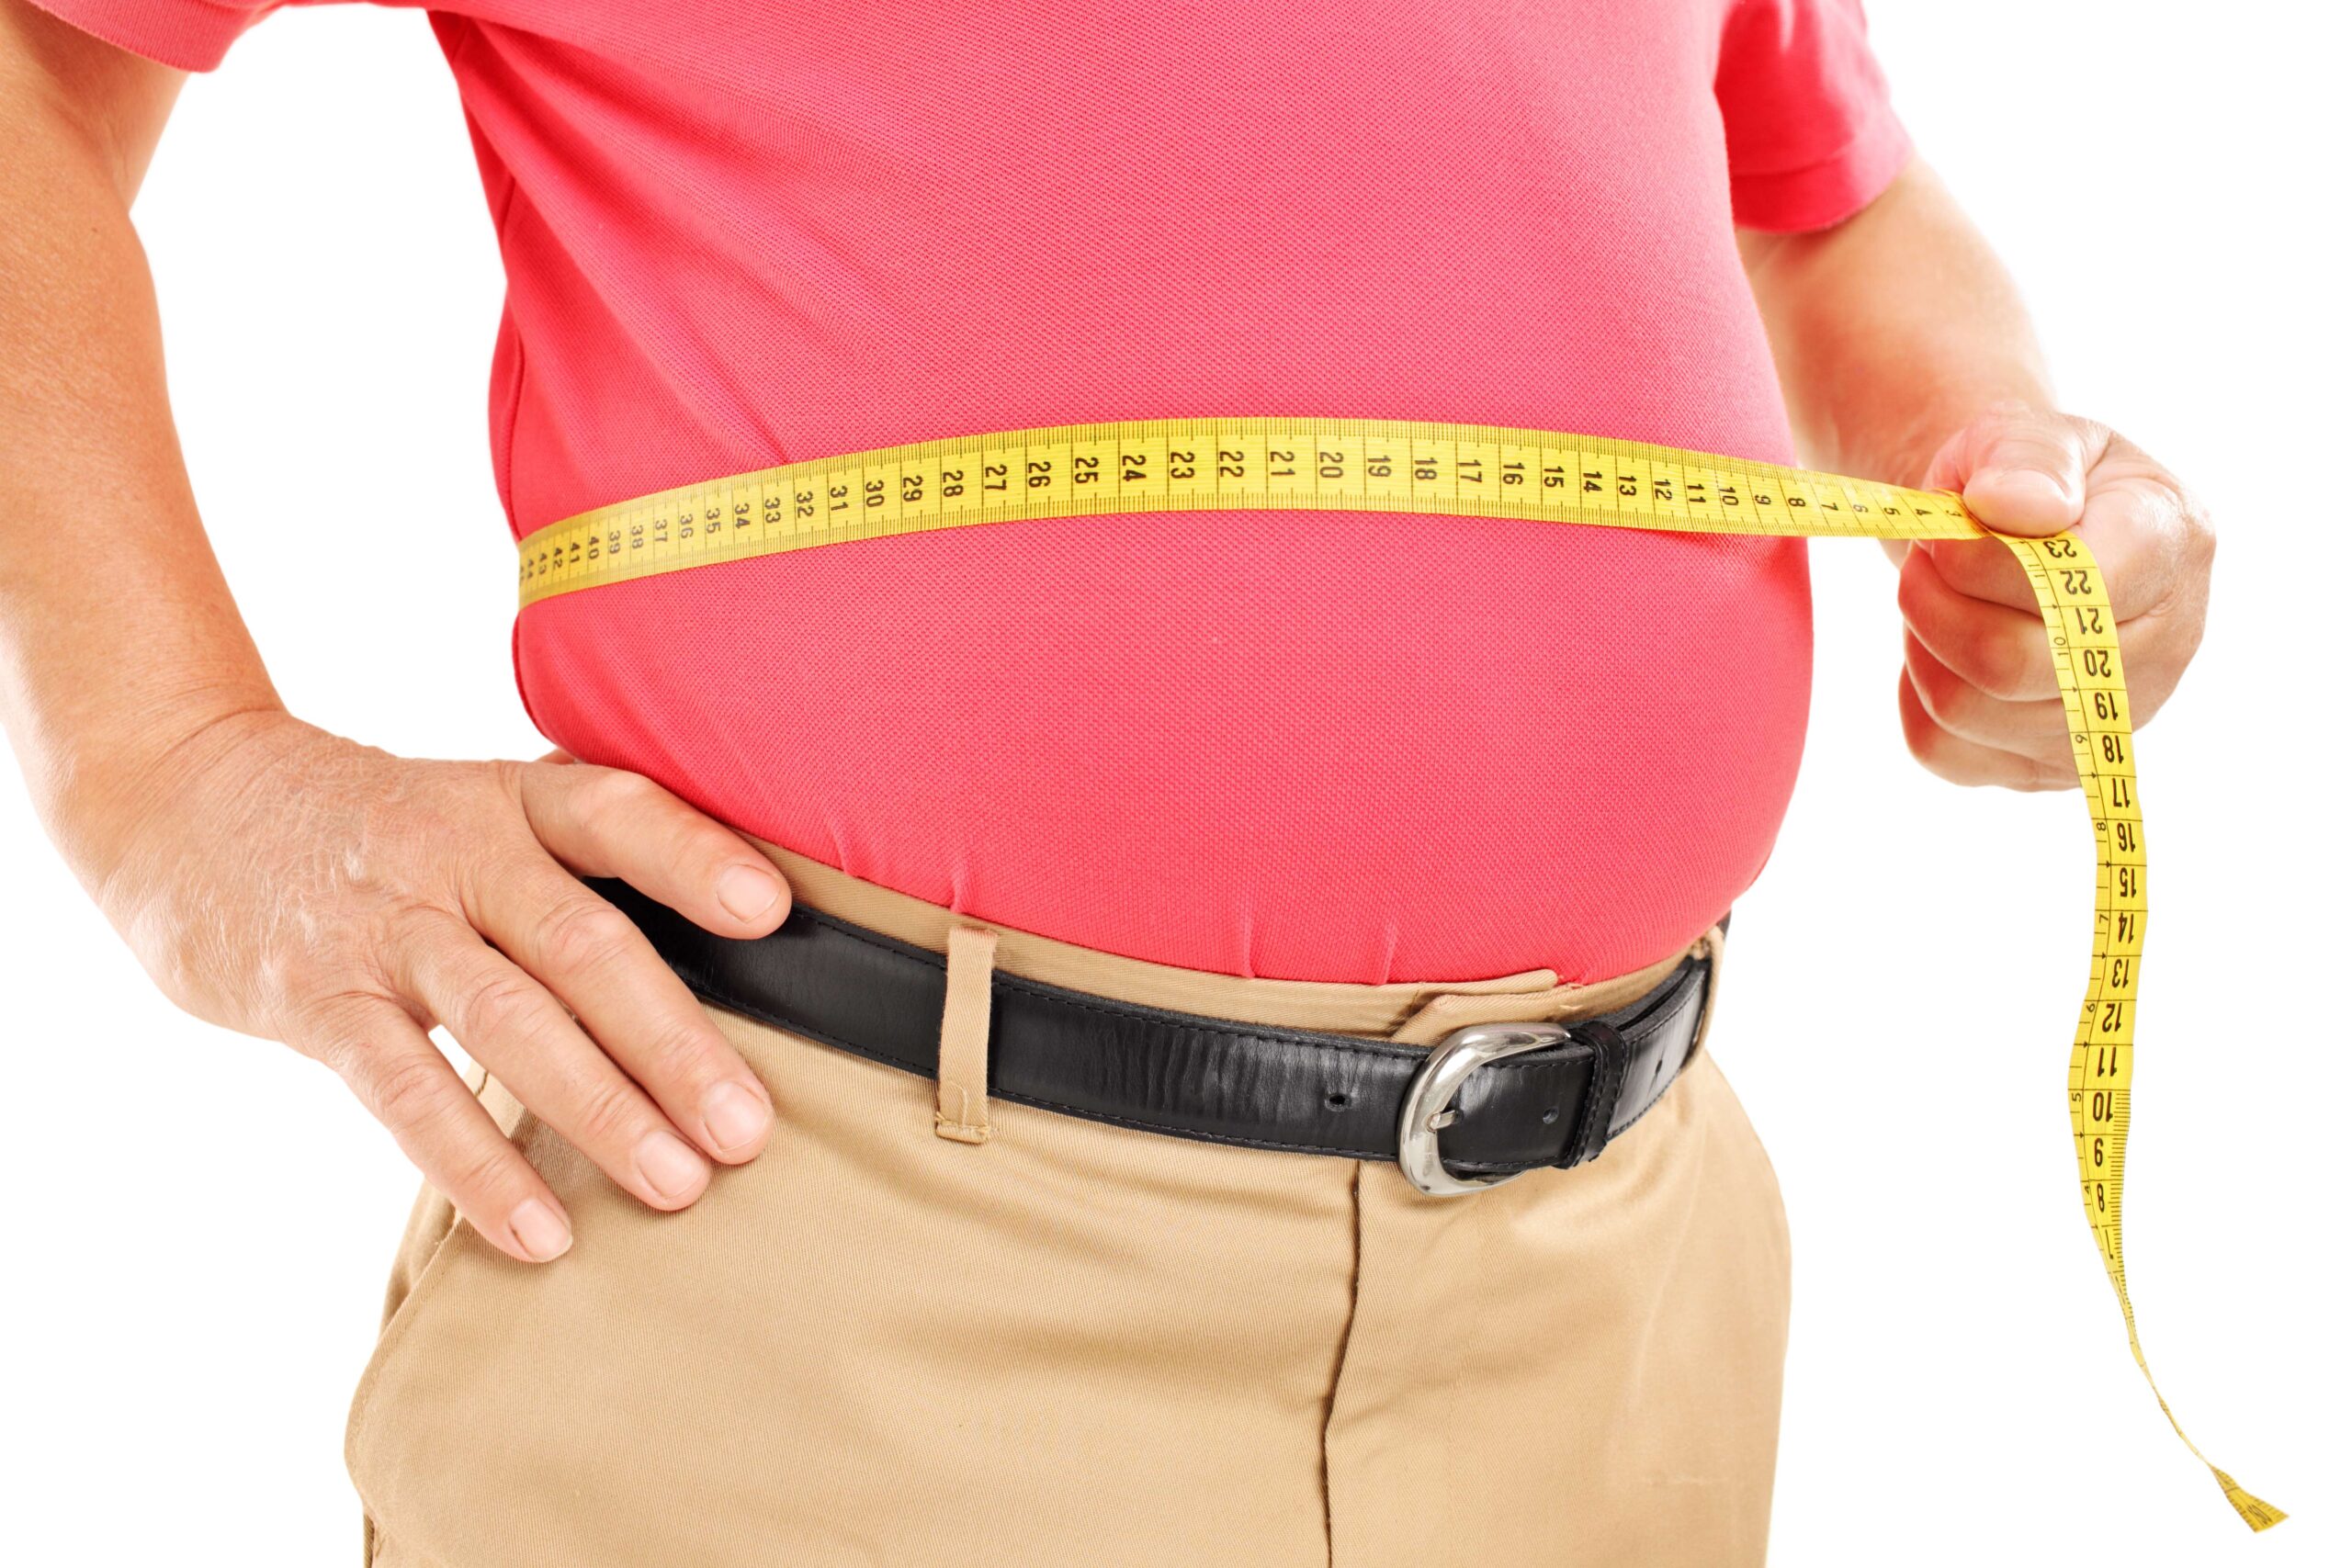 What is considered sudden weight loss?